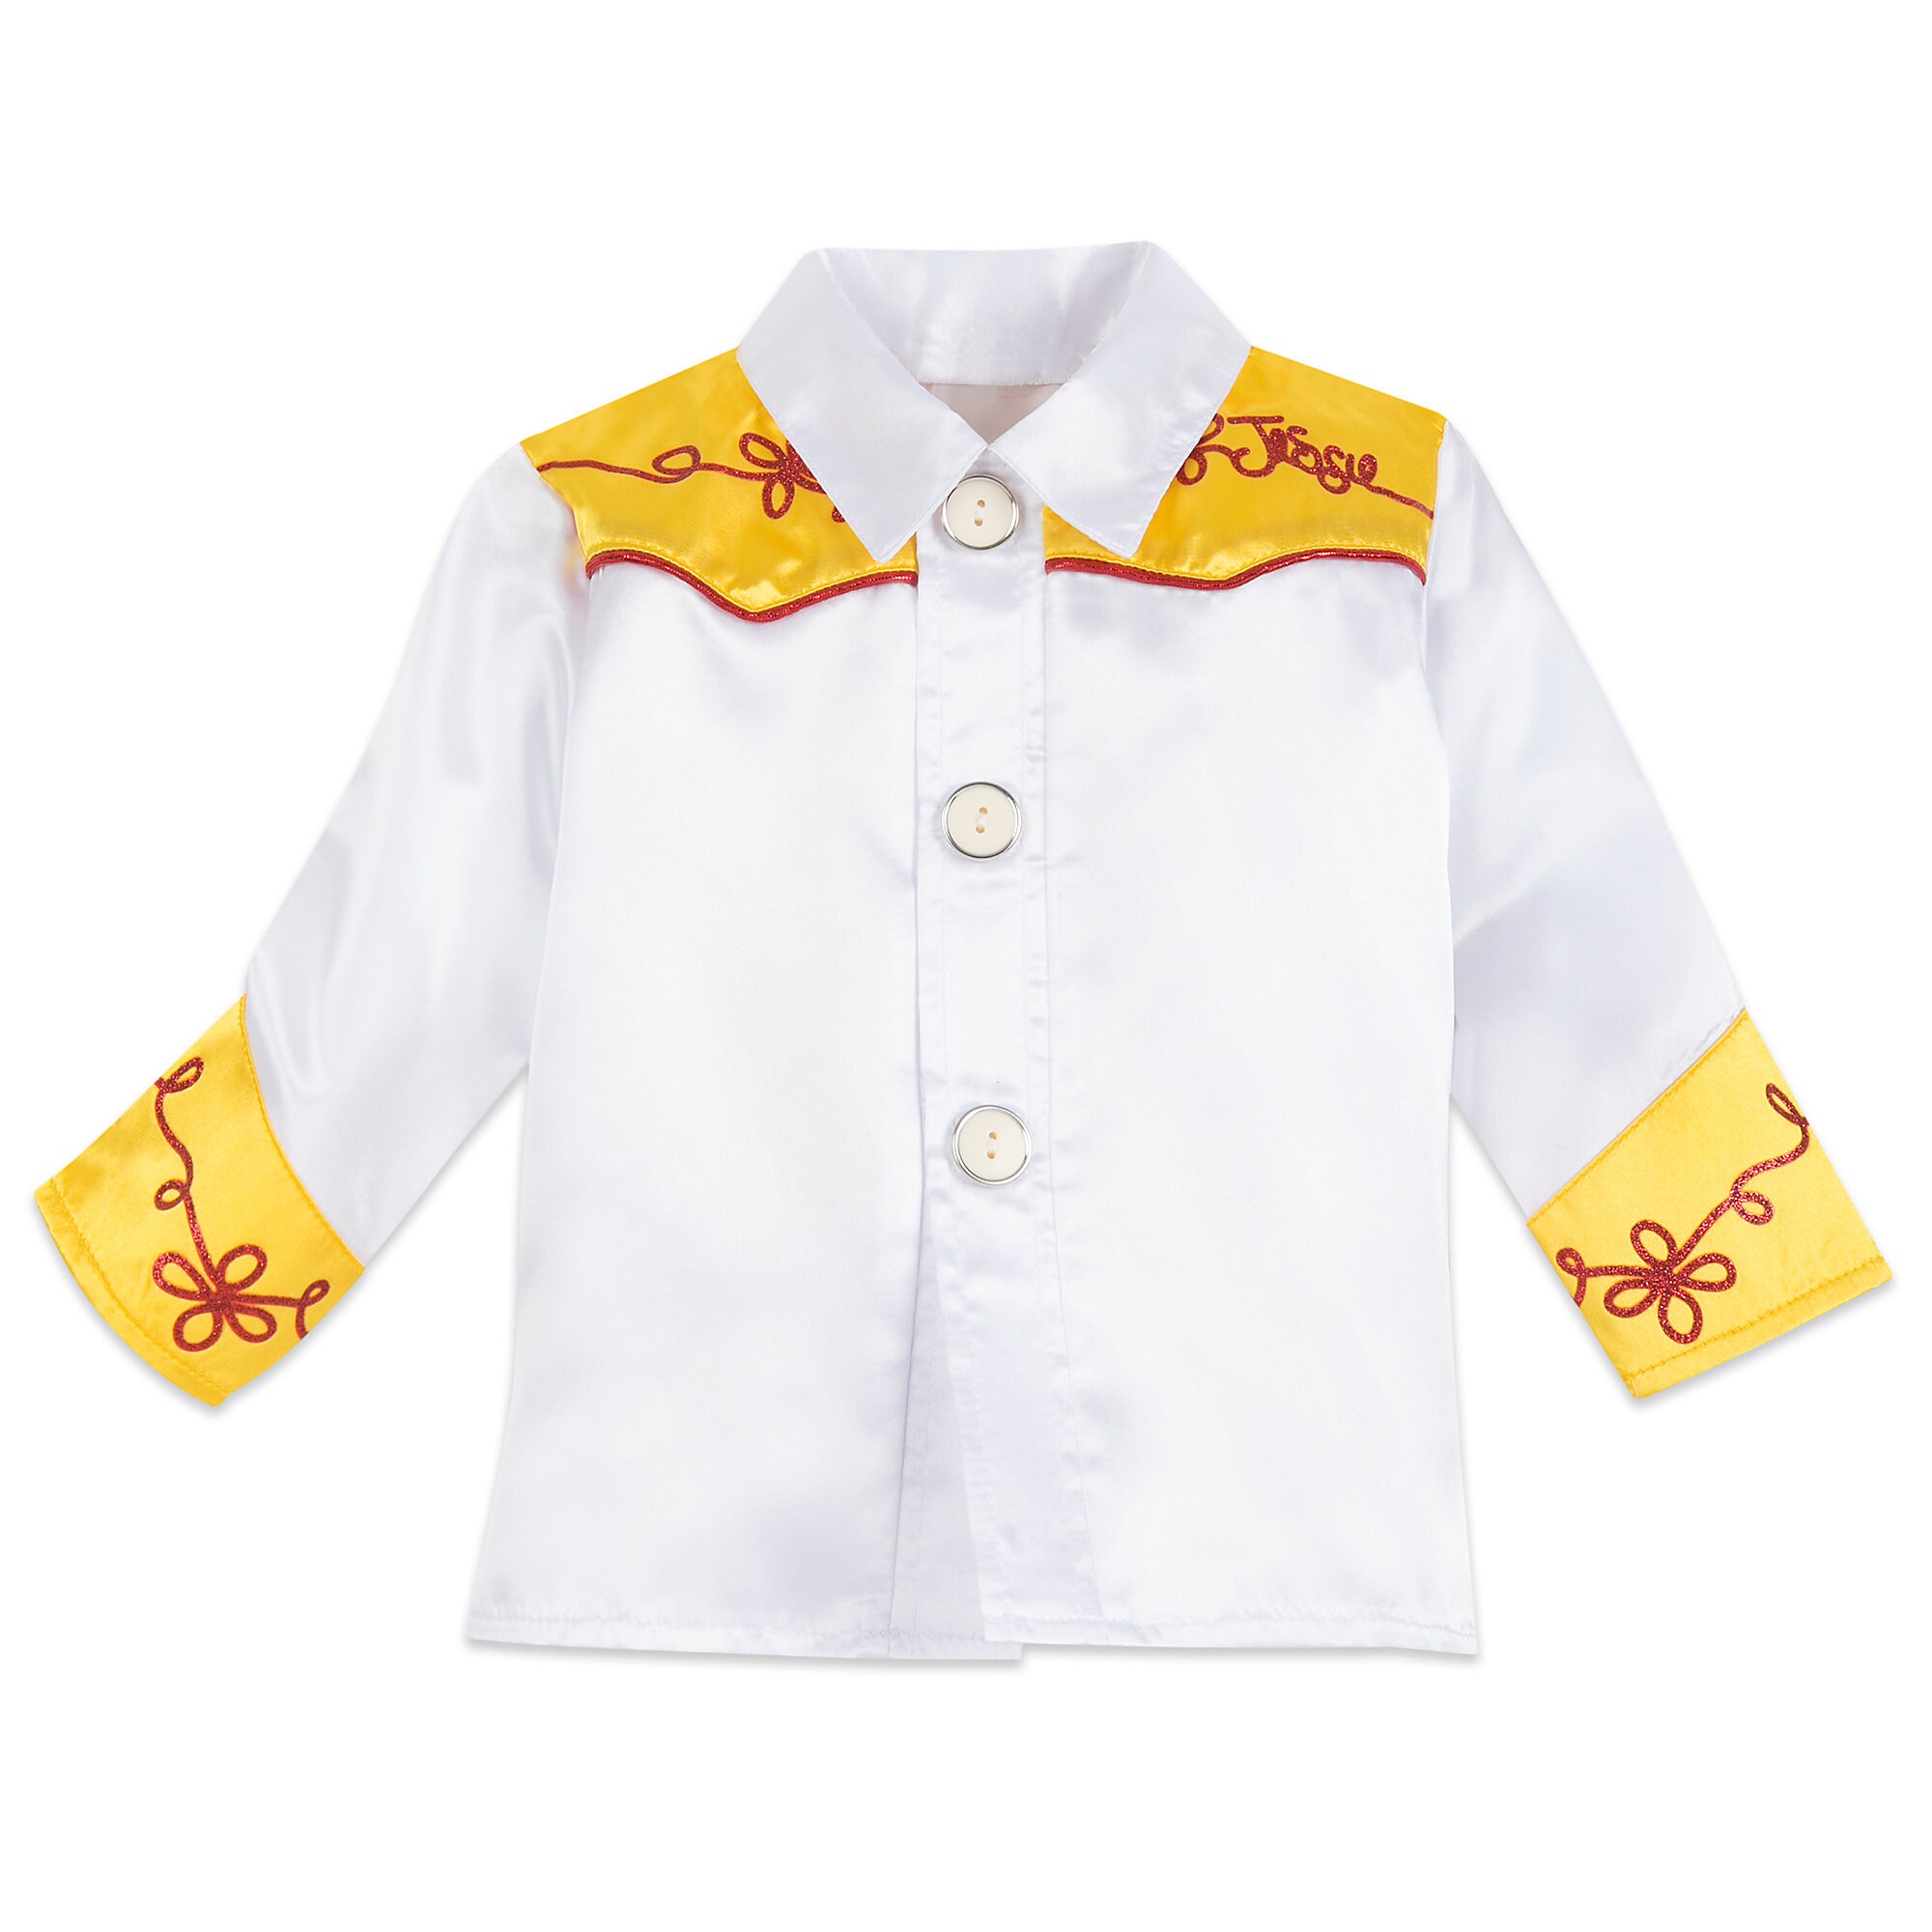 Jessie Costume for Baby - Toy Story